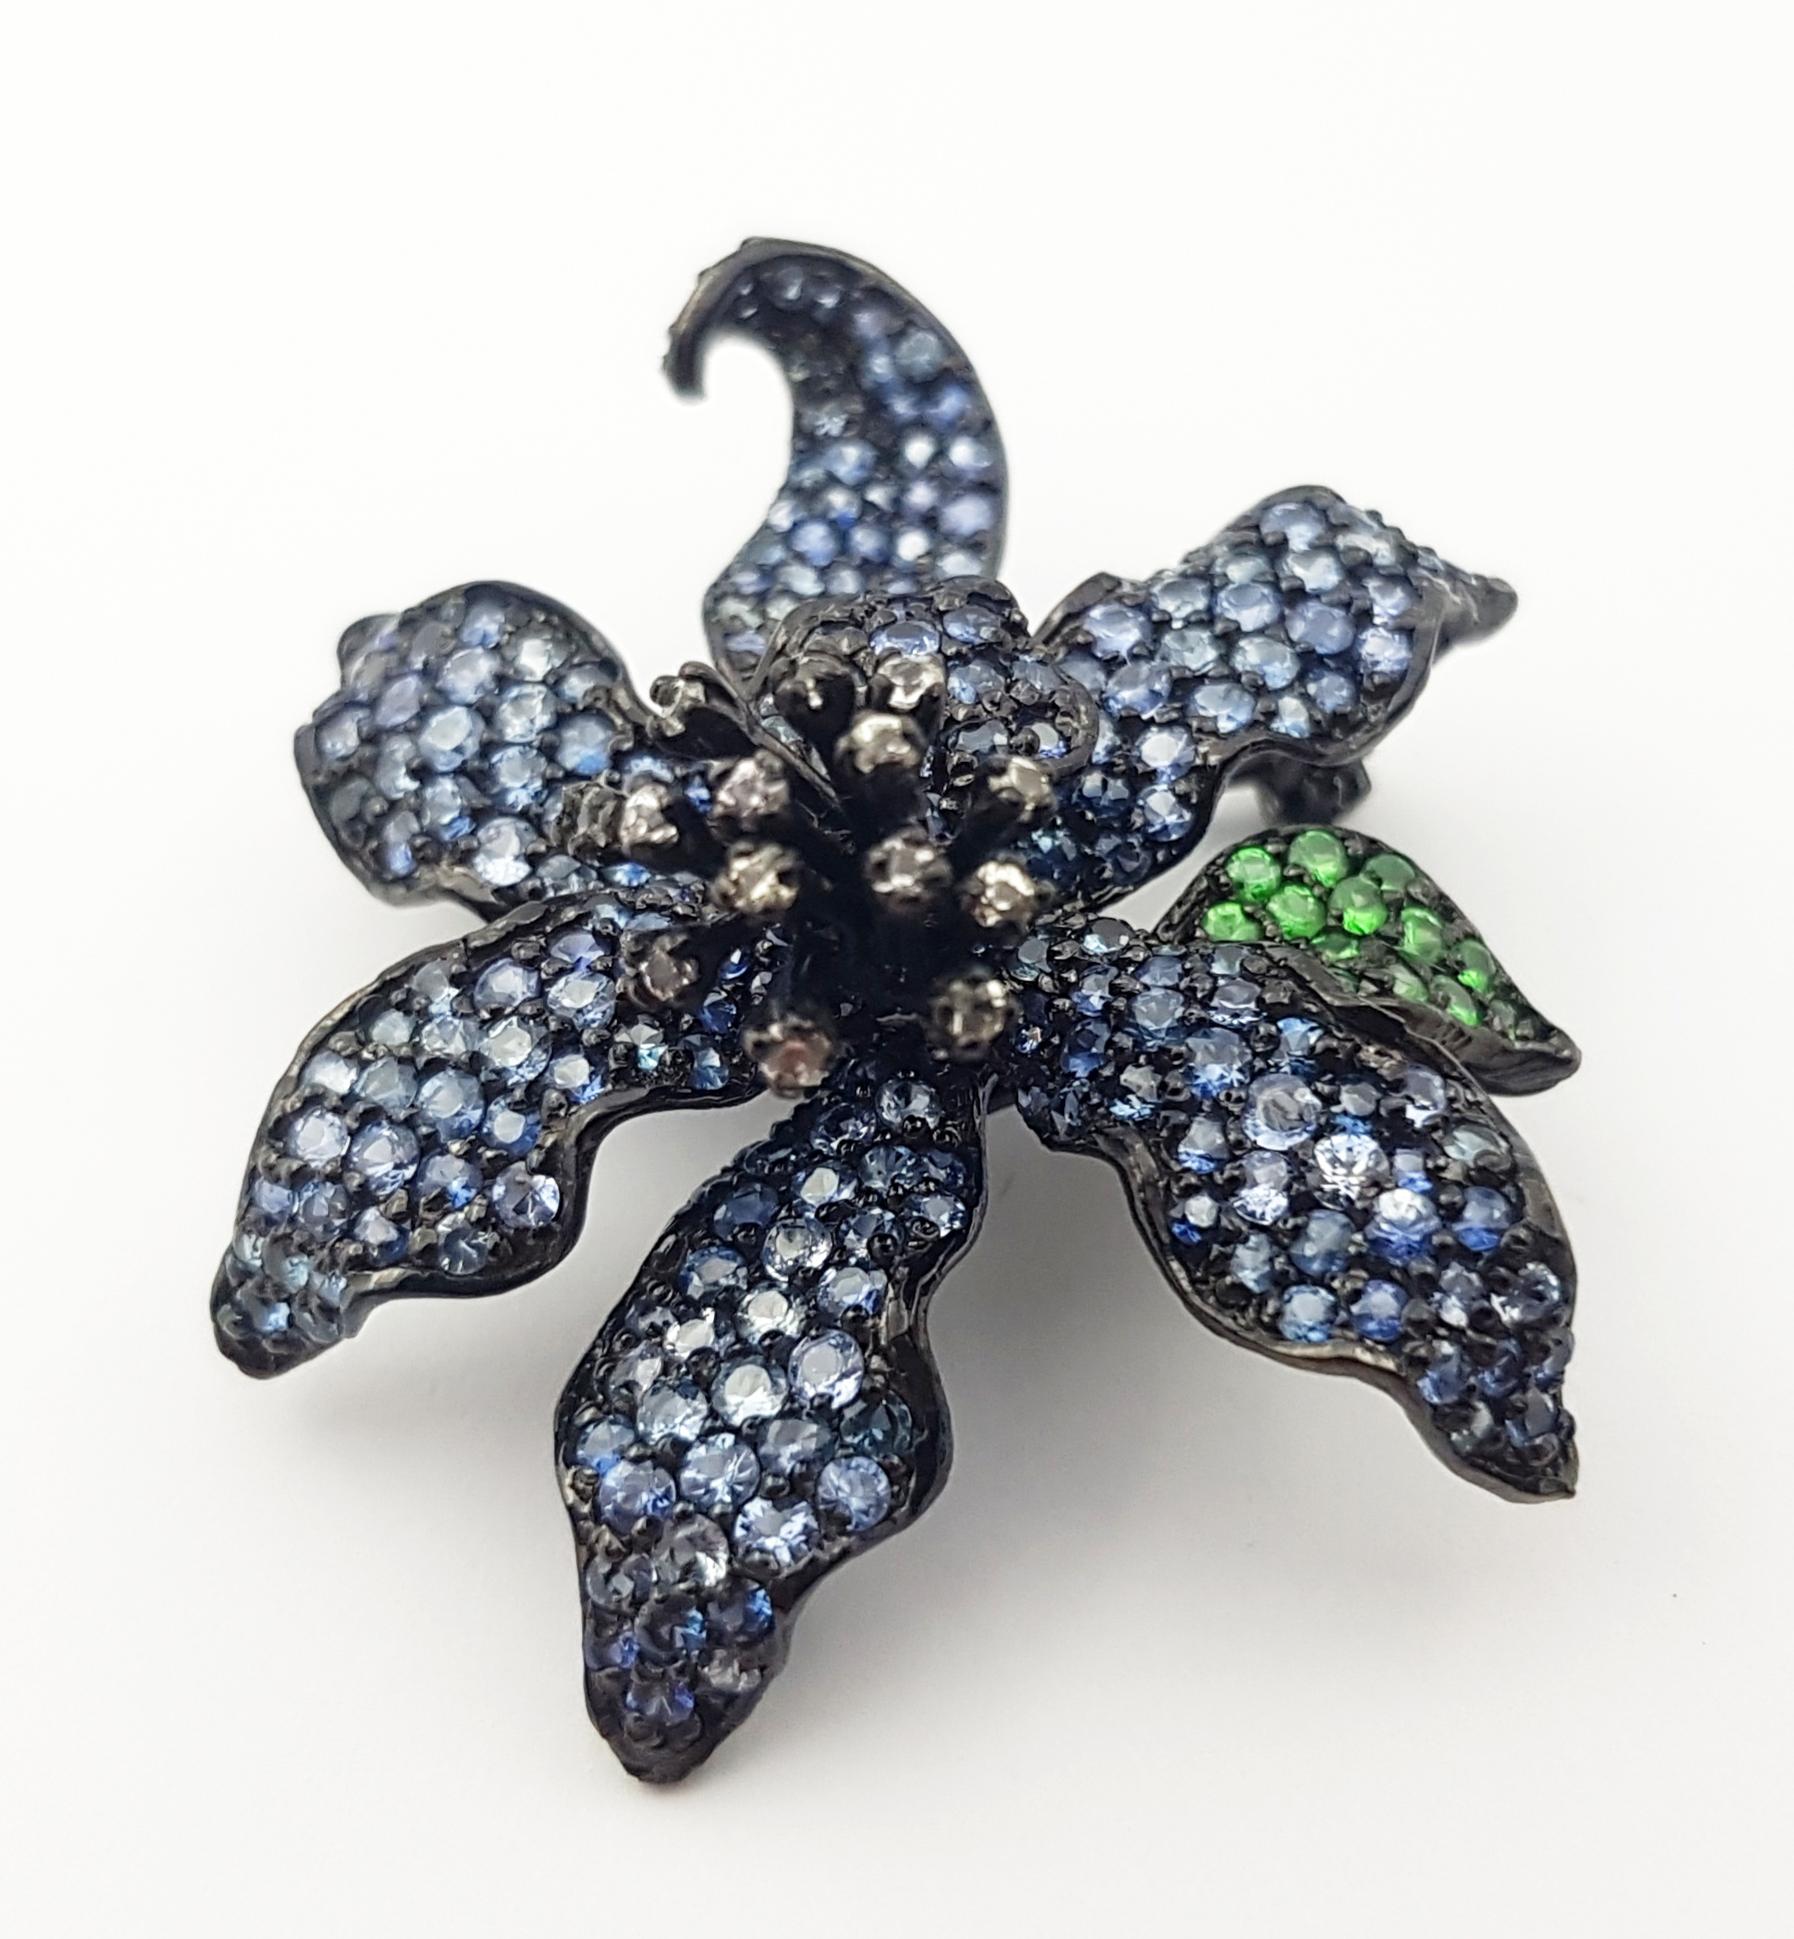 Black Sapphire, White Sapphire and Tsavorite Pendant/Brooch set in Silver Settings
(chain not included)

Width: 3.5 cm 
Length: 4.2 cm
Total Weight: 11.75  grams

*Please note that the silver setting is plated with rhodium to promote shine and help